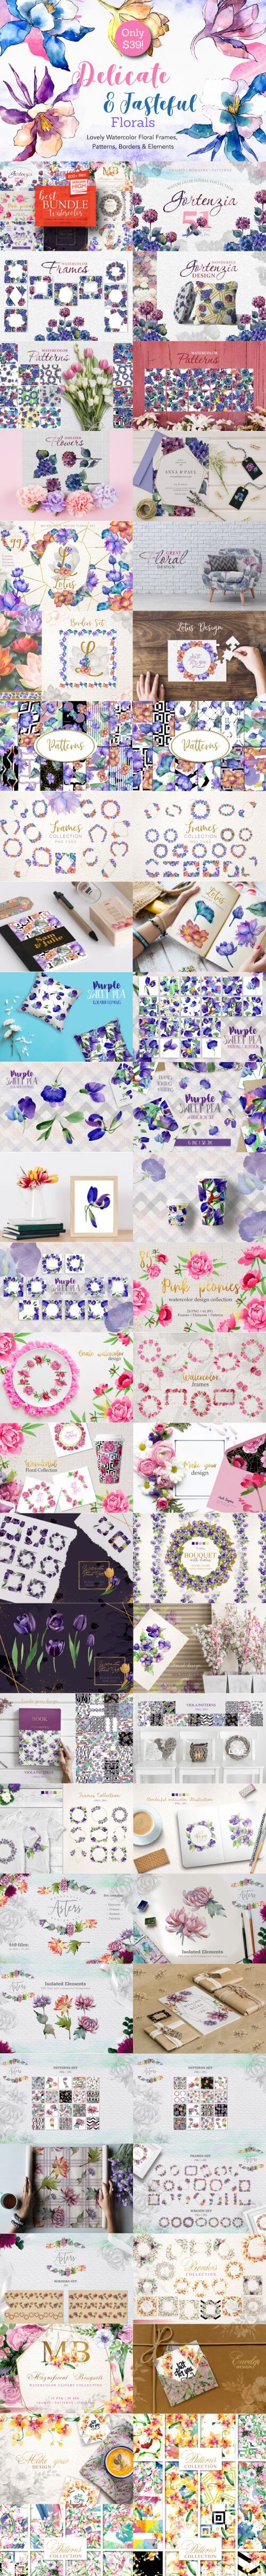 delicate-and-tasteful-florals-optimized-collage.jpg